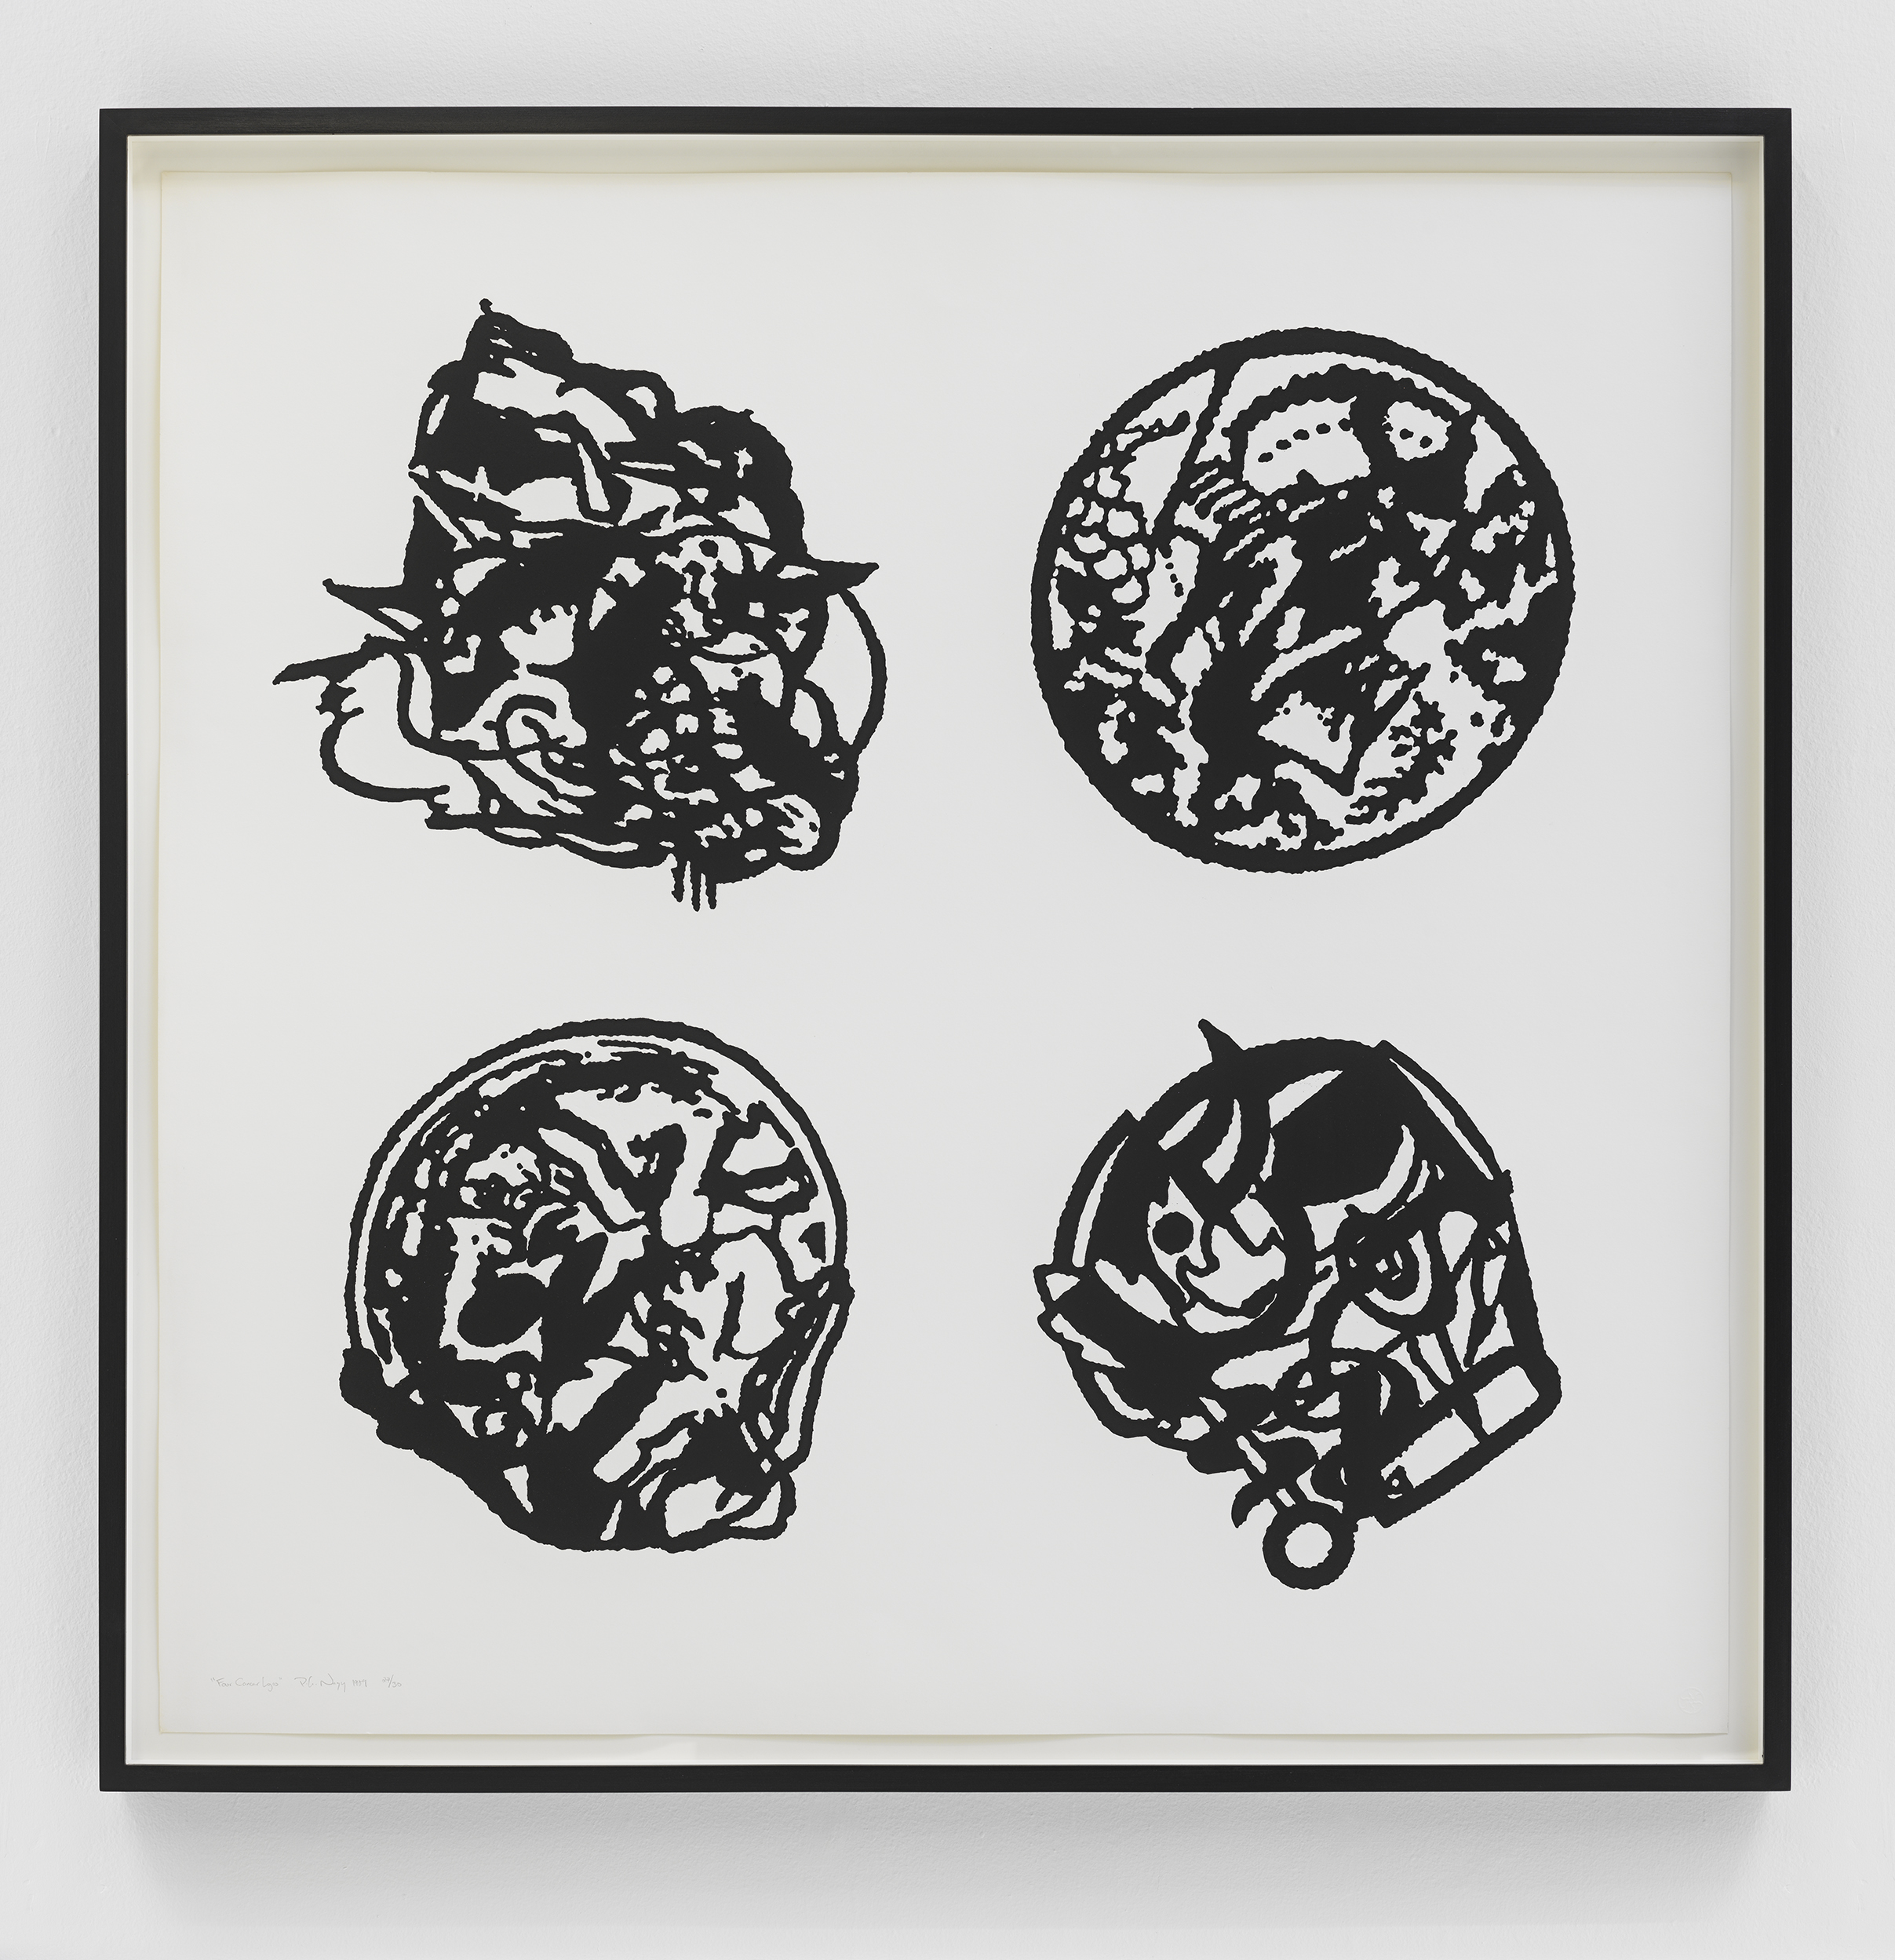 Peter Nagy, Four Cancer Logos, 1989, Woodcut, 44h x 44w in., Edition #27/30